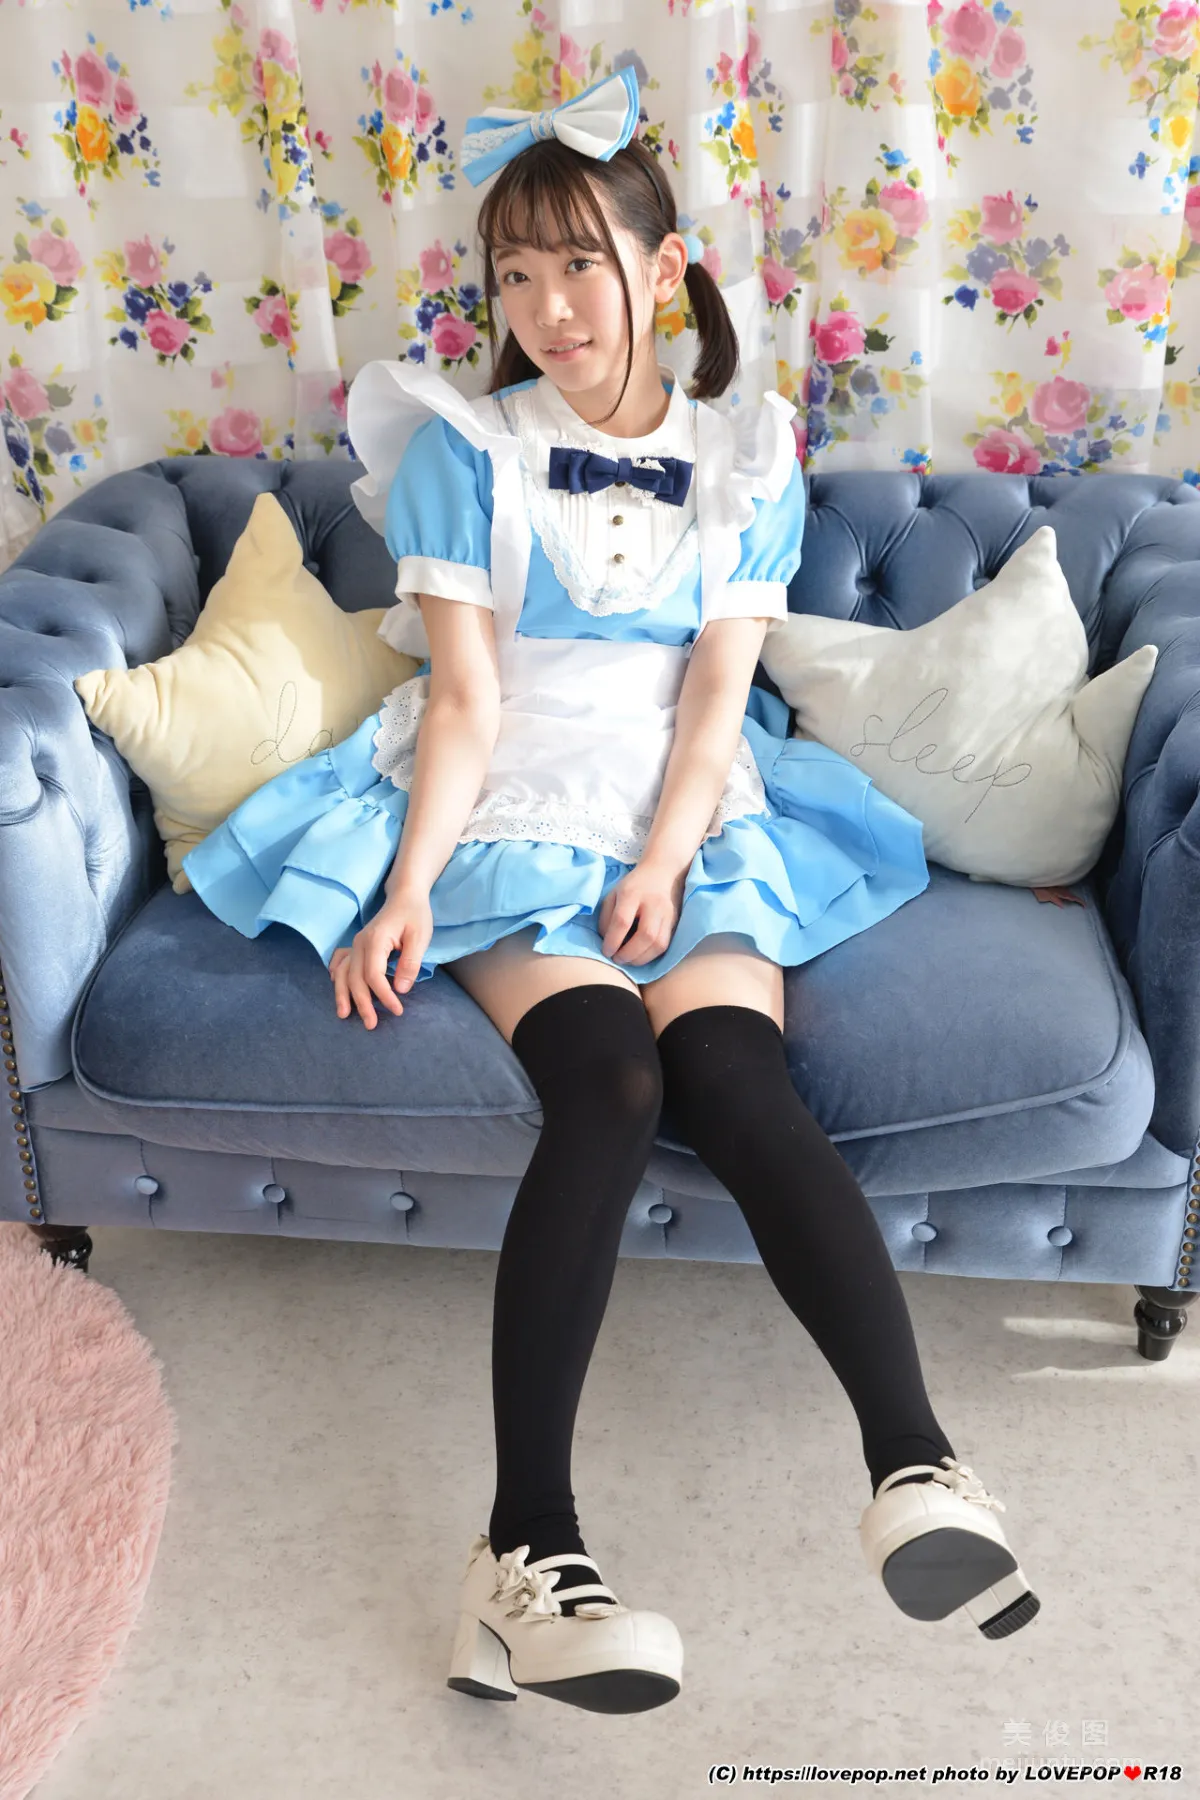 [LOVEPOP] Special Maid Collection - 架乃ゆら Photoset 0115